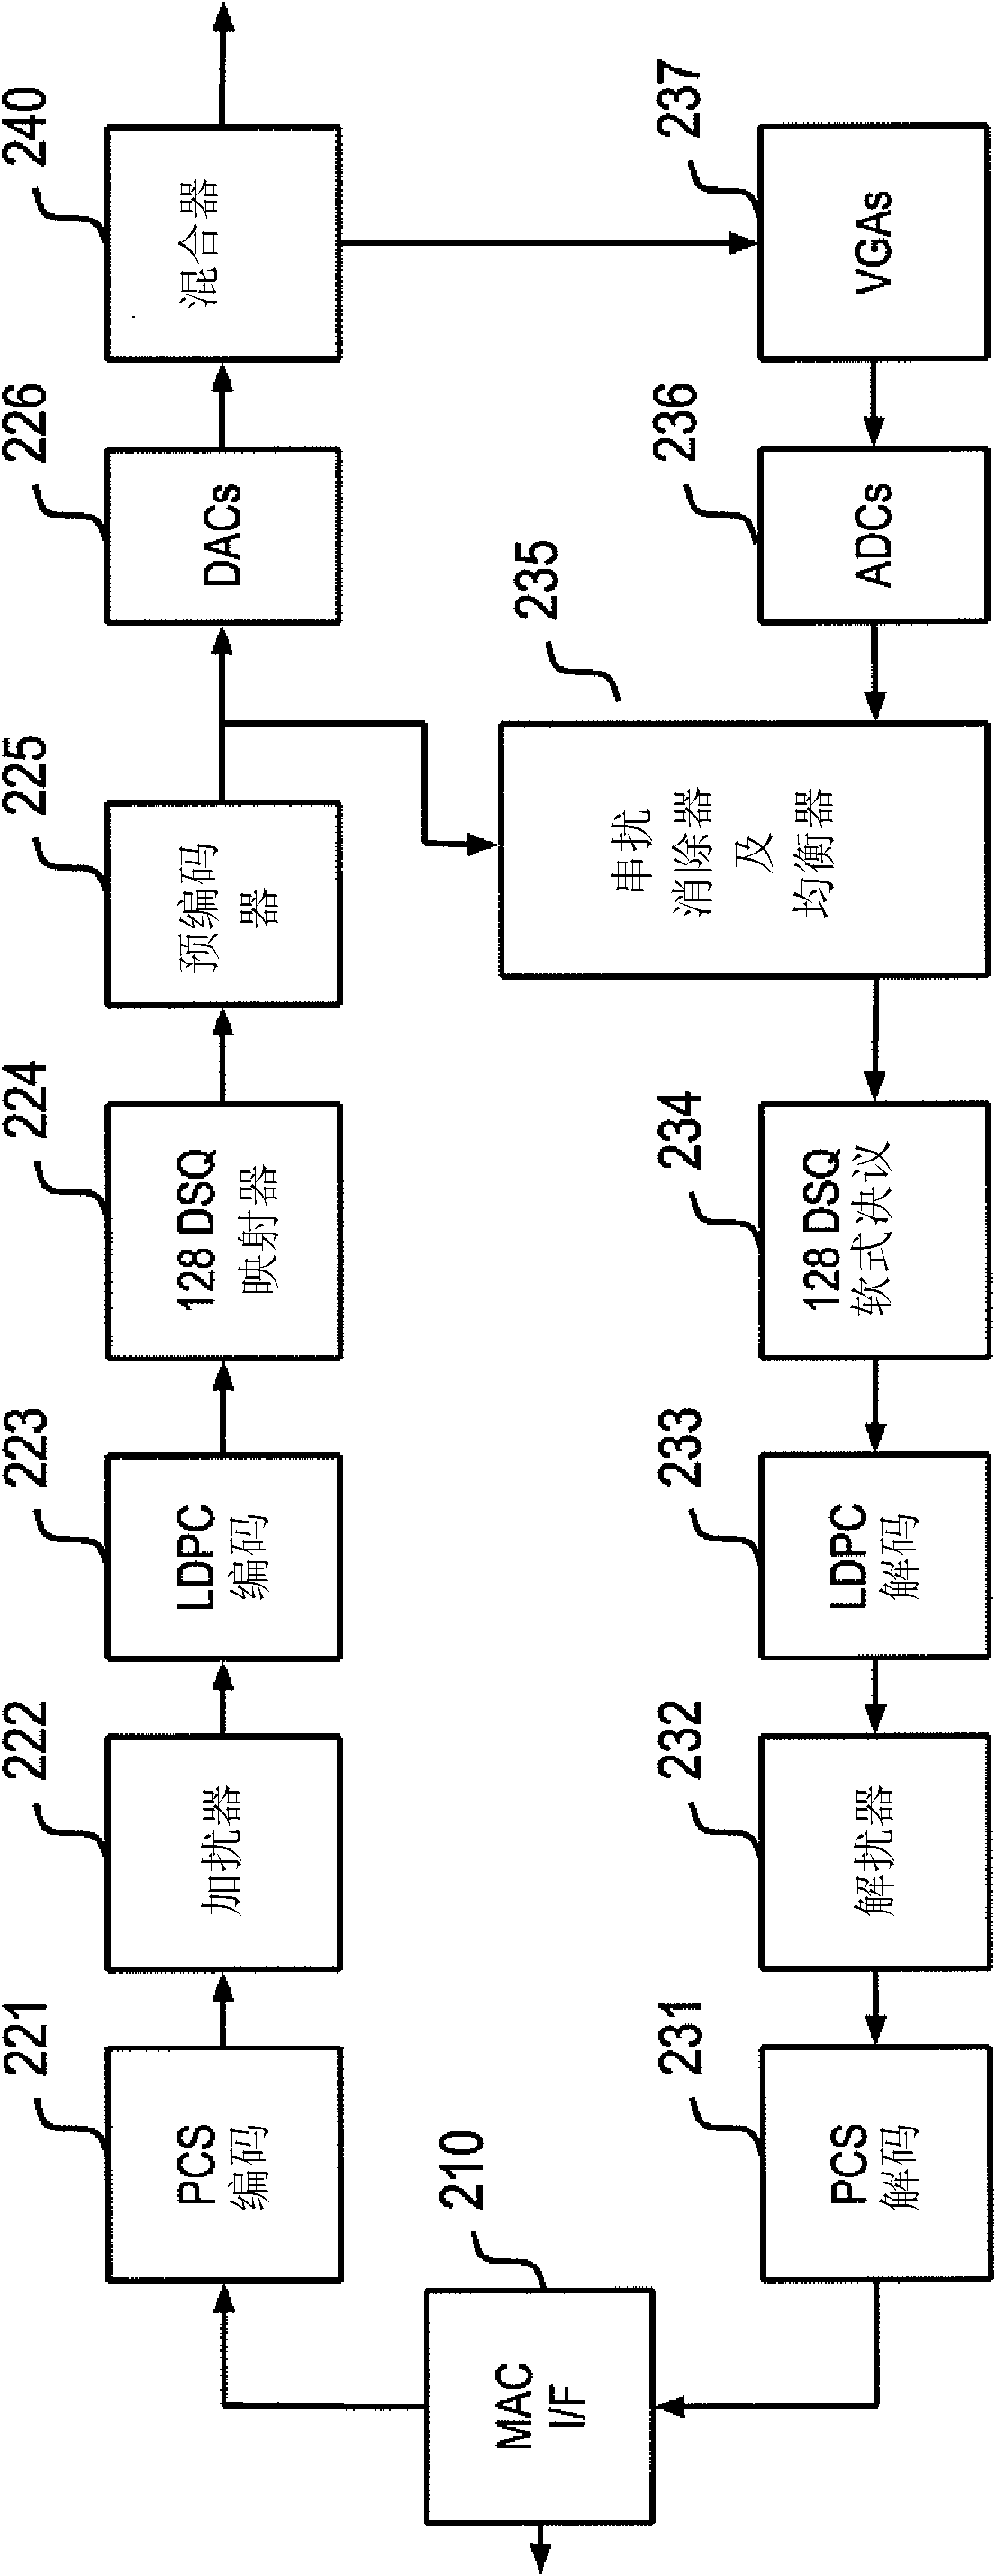 System and method for frequency division multiplexed high speed physical layer devices